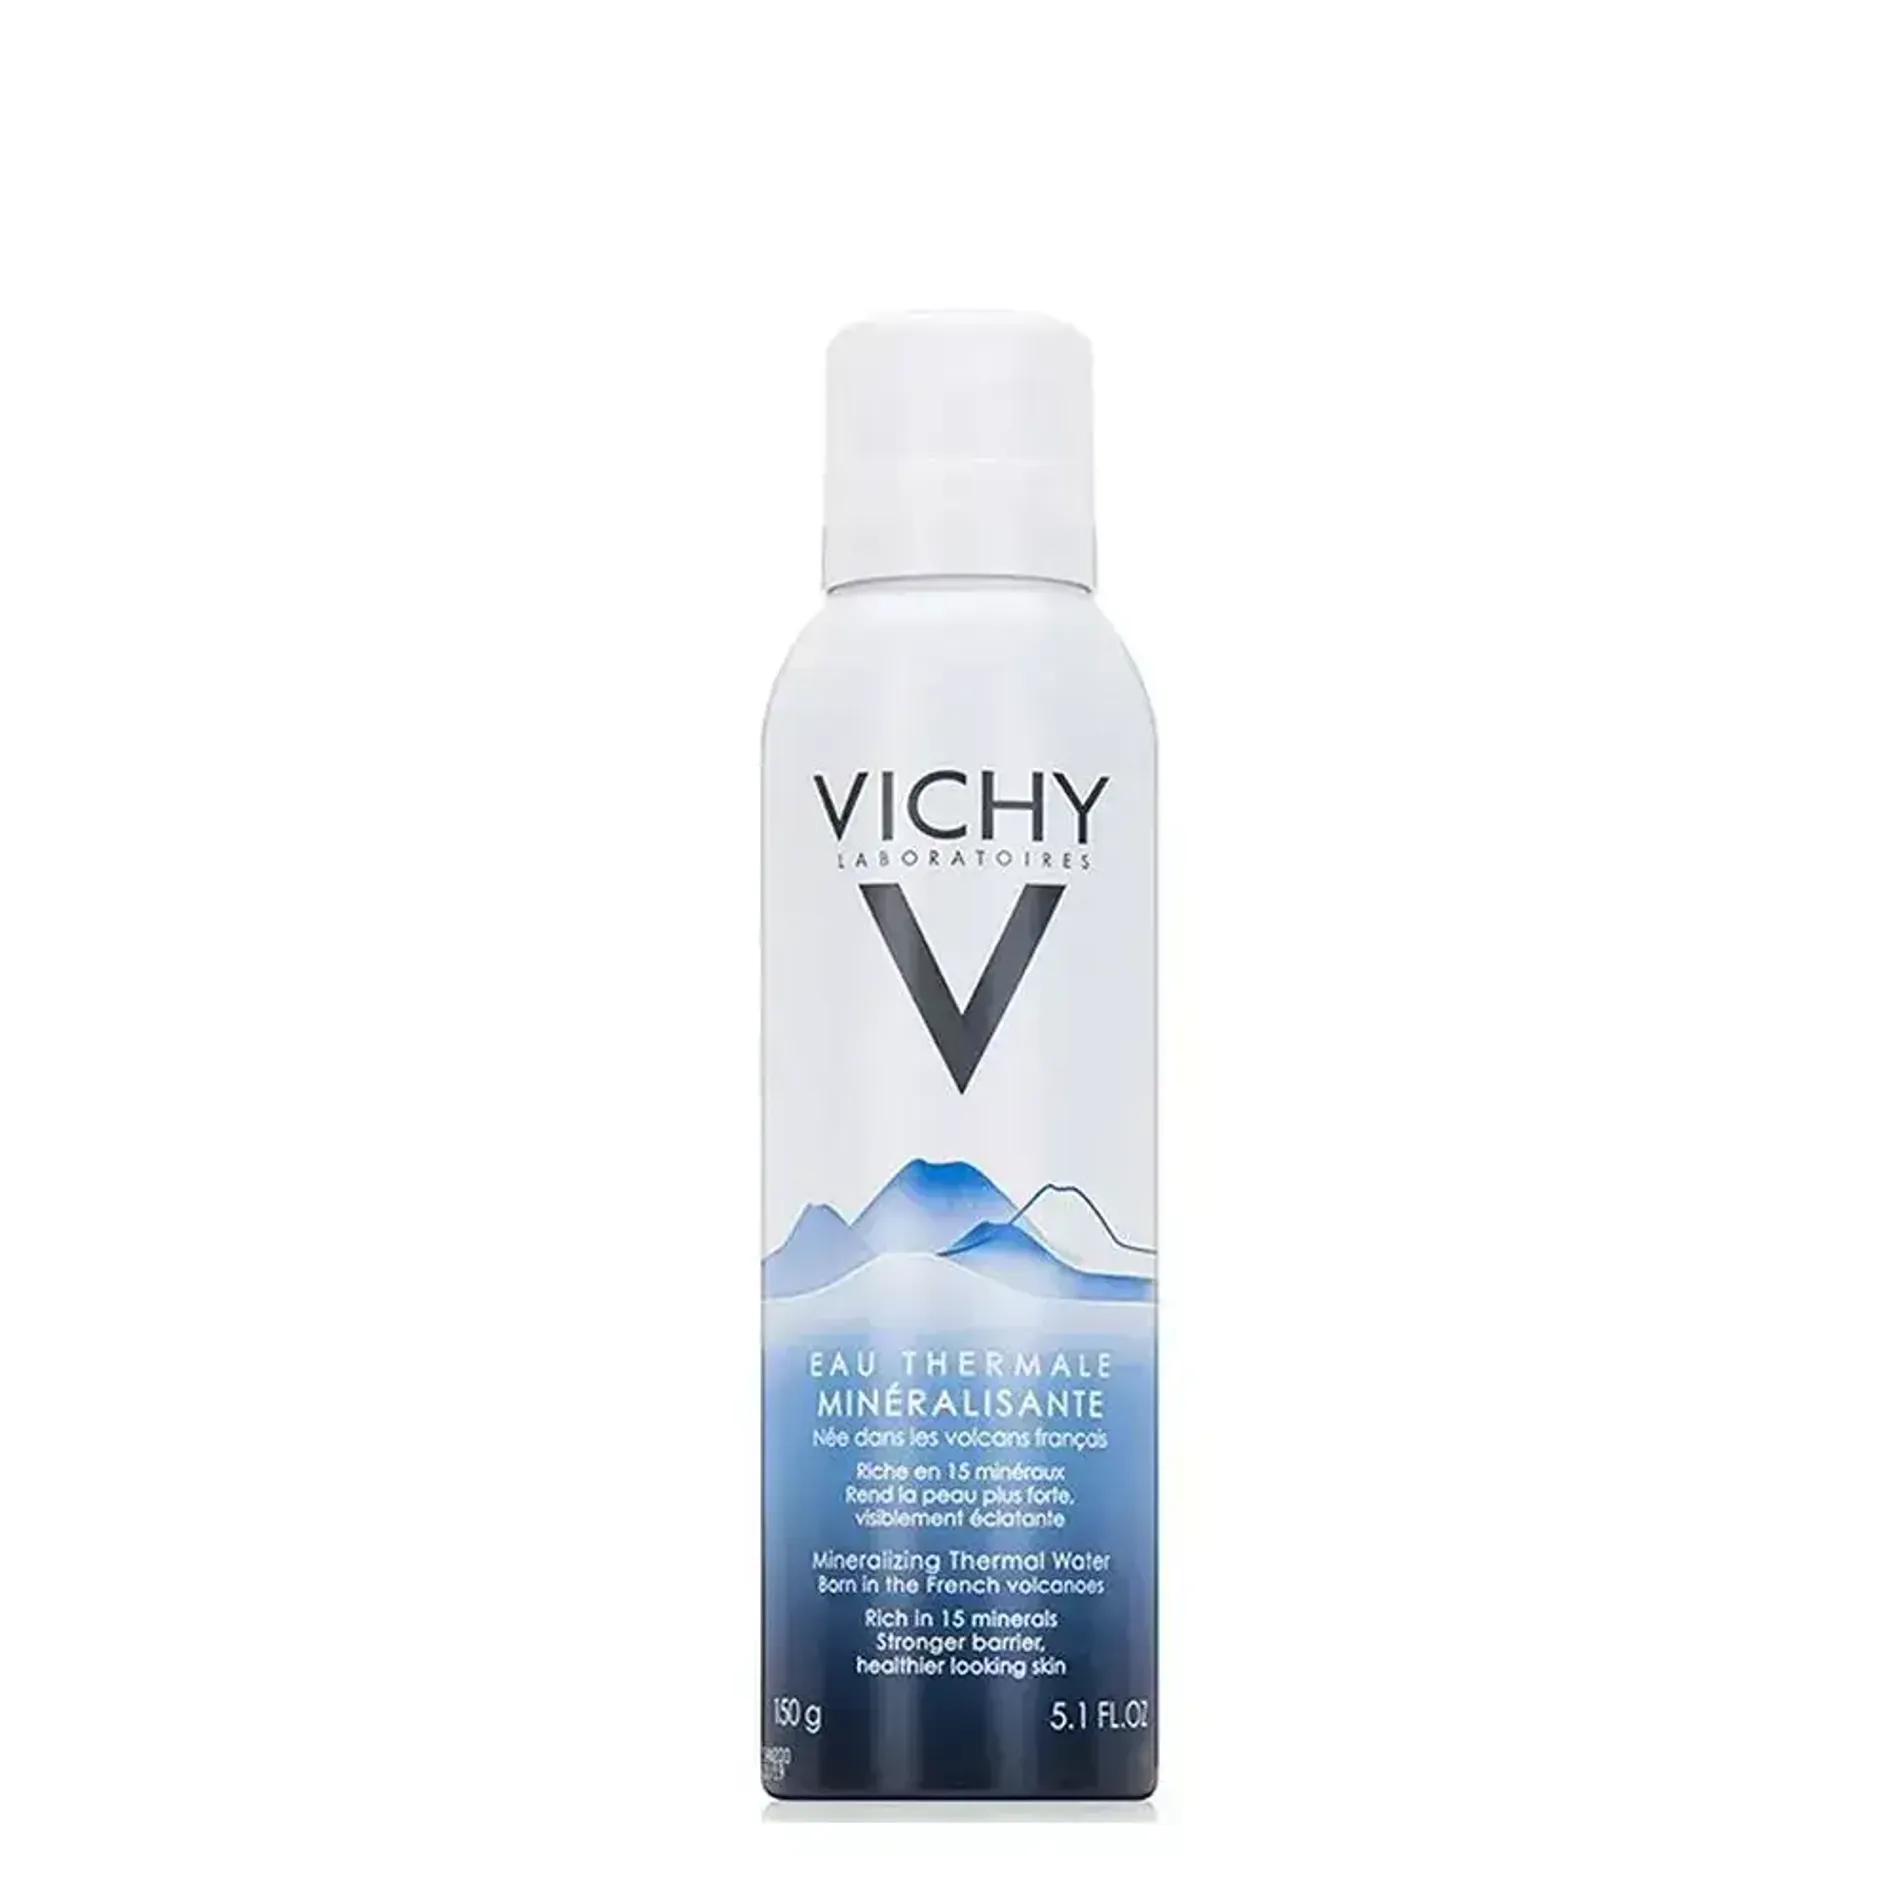 xit-khoang-cap-am-vichy-eau-thermale-mineralizing-thermal-water-2